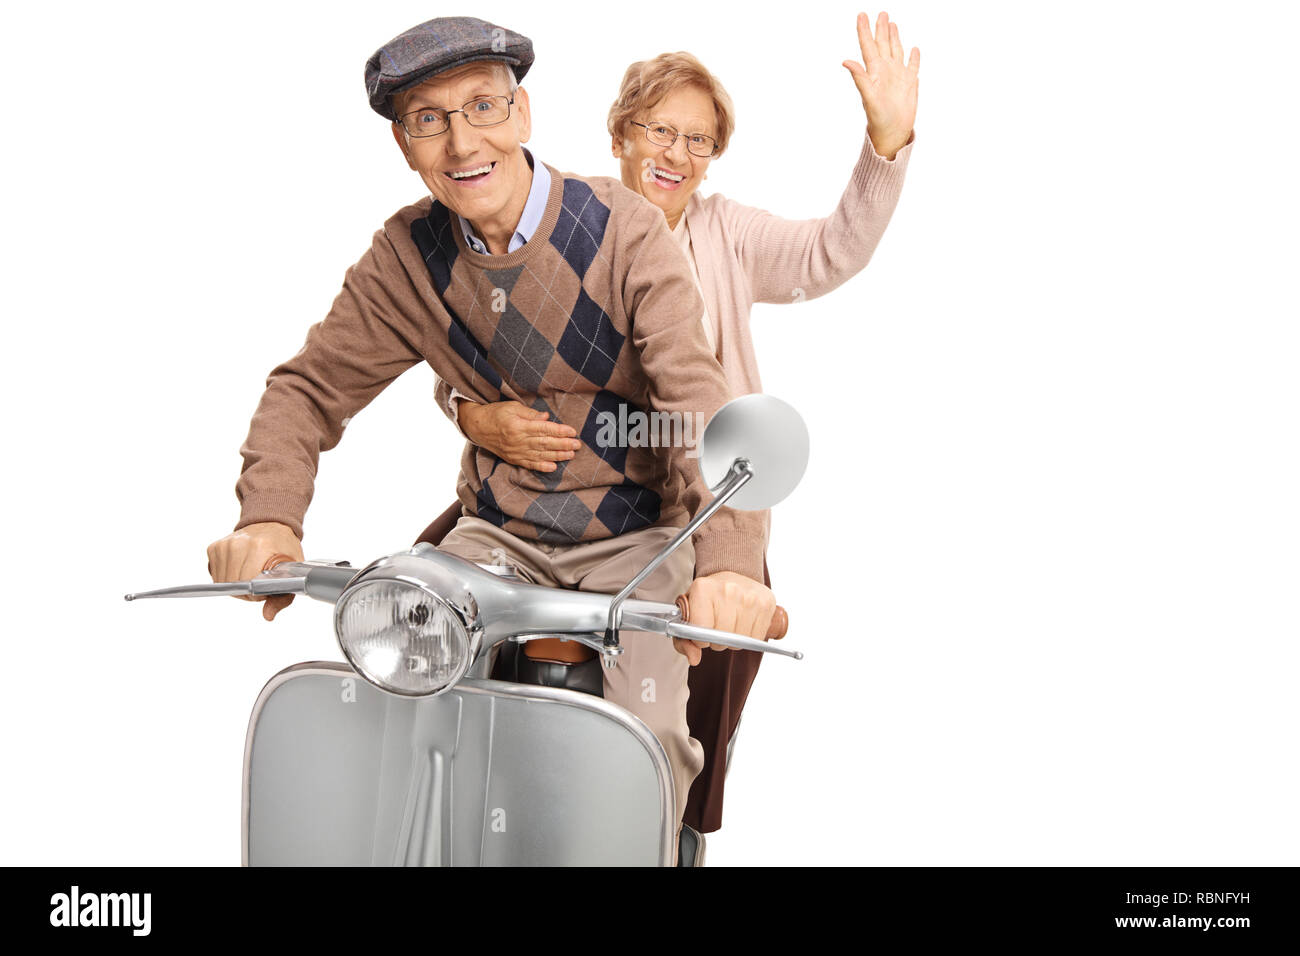 Elderly man and woman riding a vintage scooter and waving isolated on white background Stock Photo